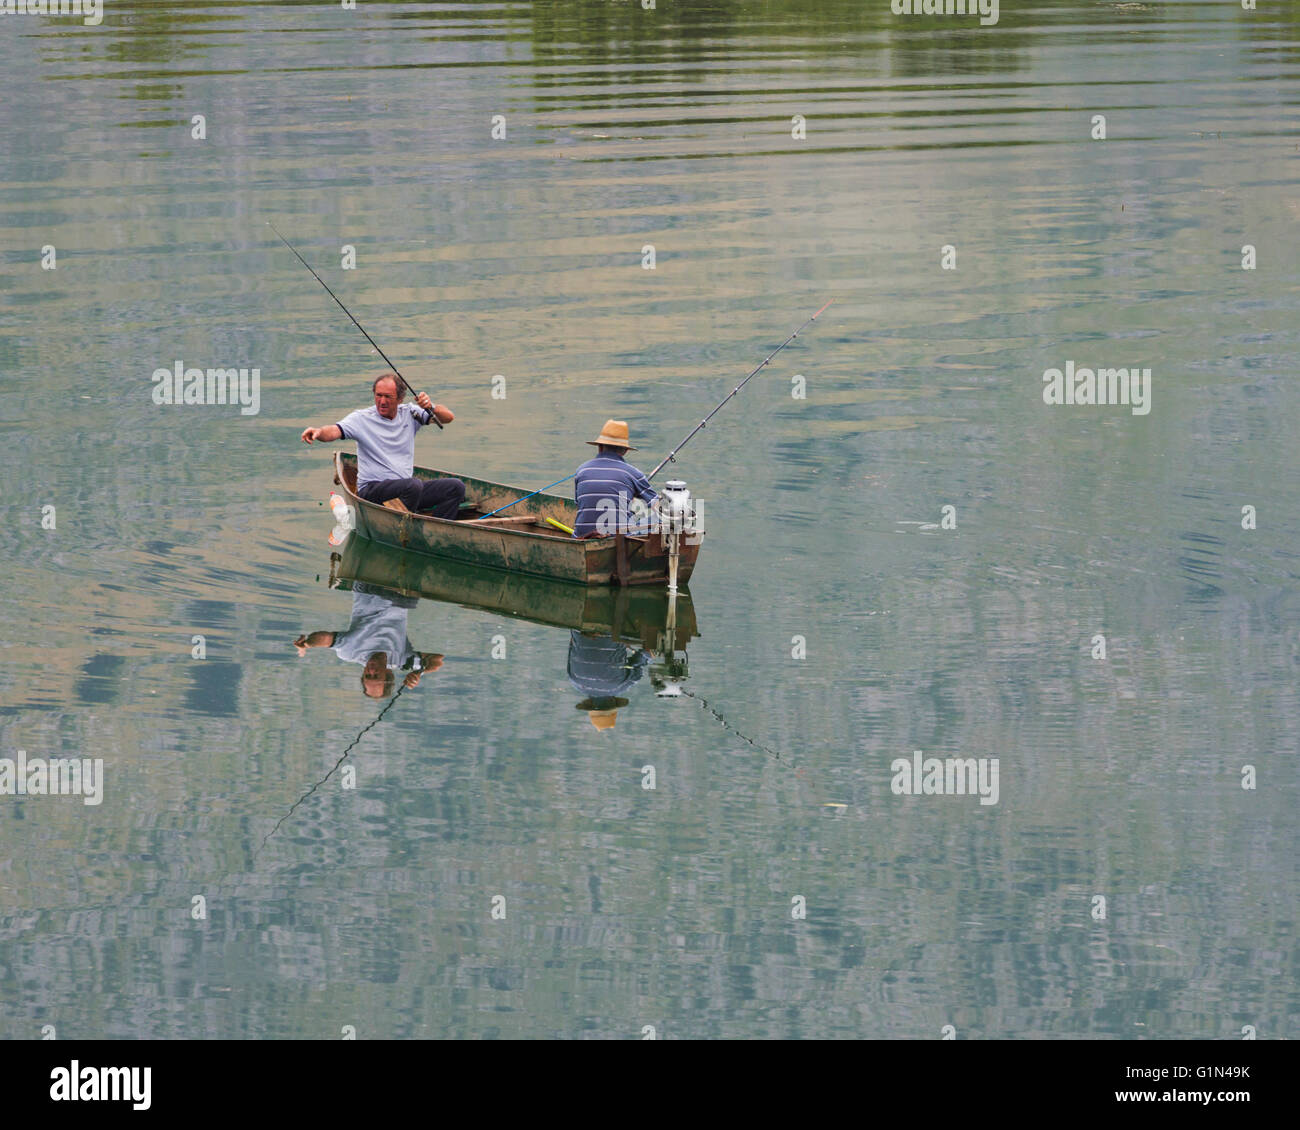 Lake Shkodra, Albania. Two men fishing from their boat.  Carp is the usual fish caught in the lake. Stock Photo